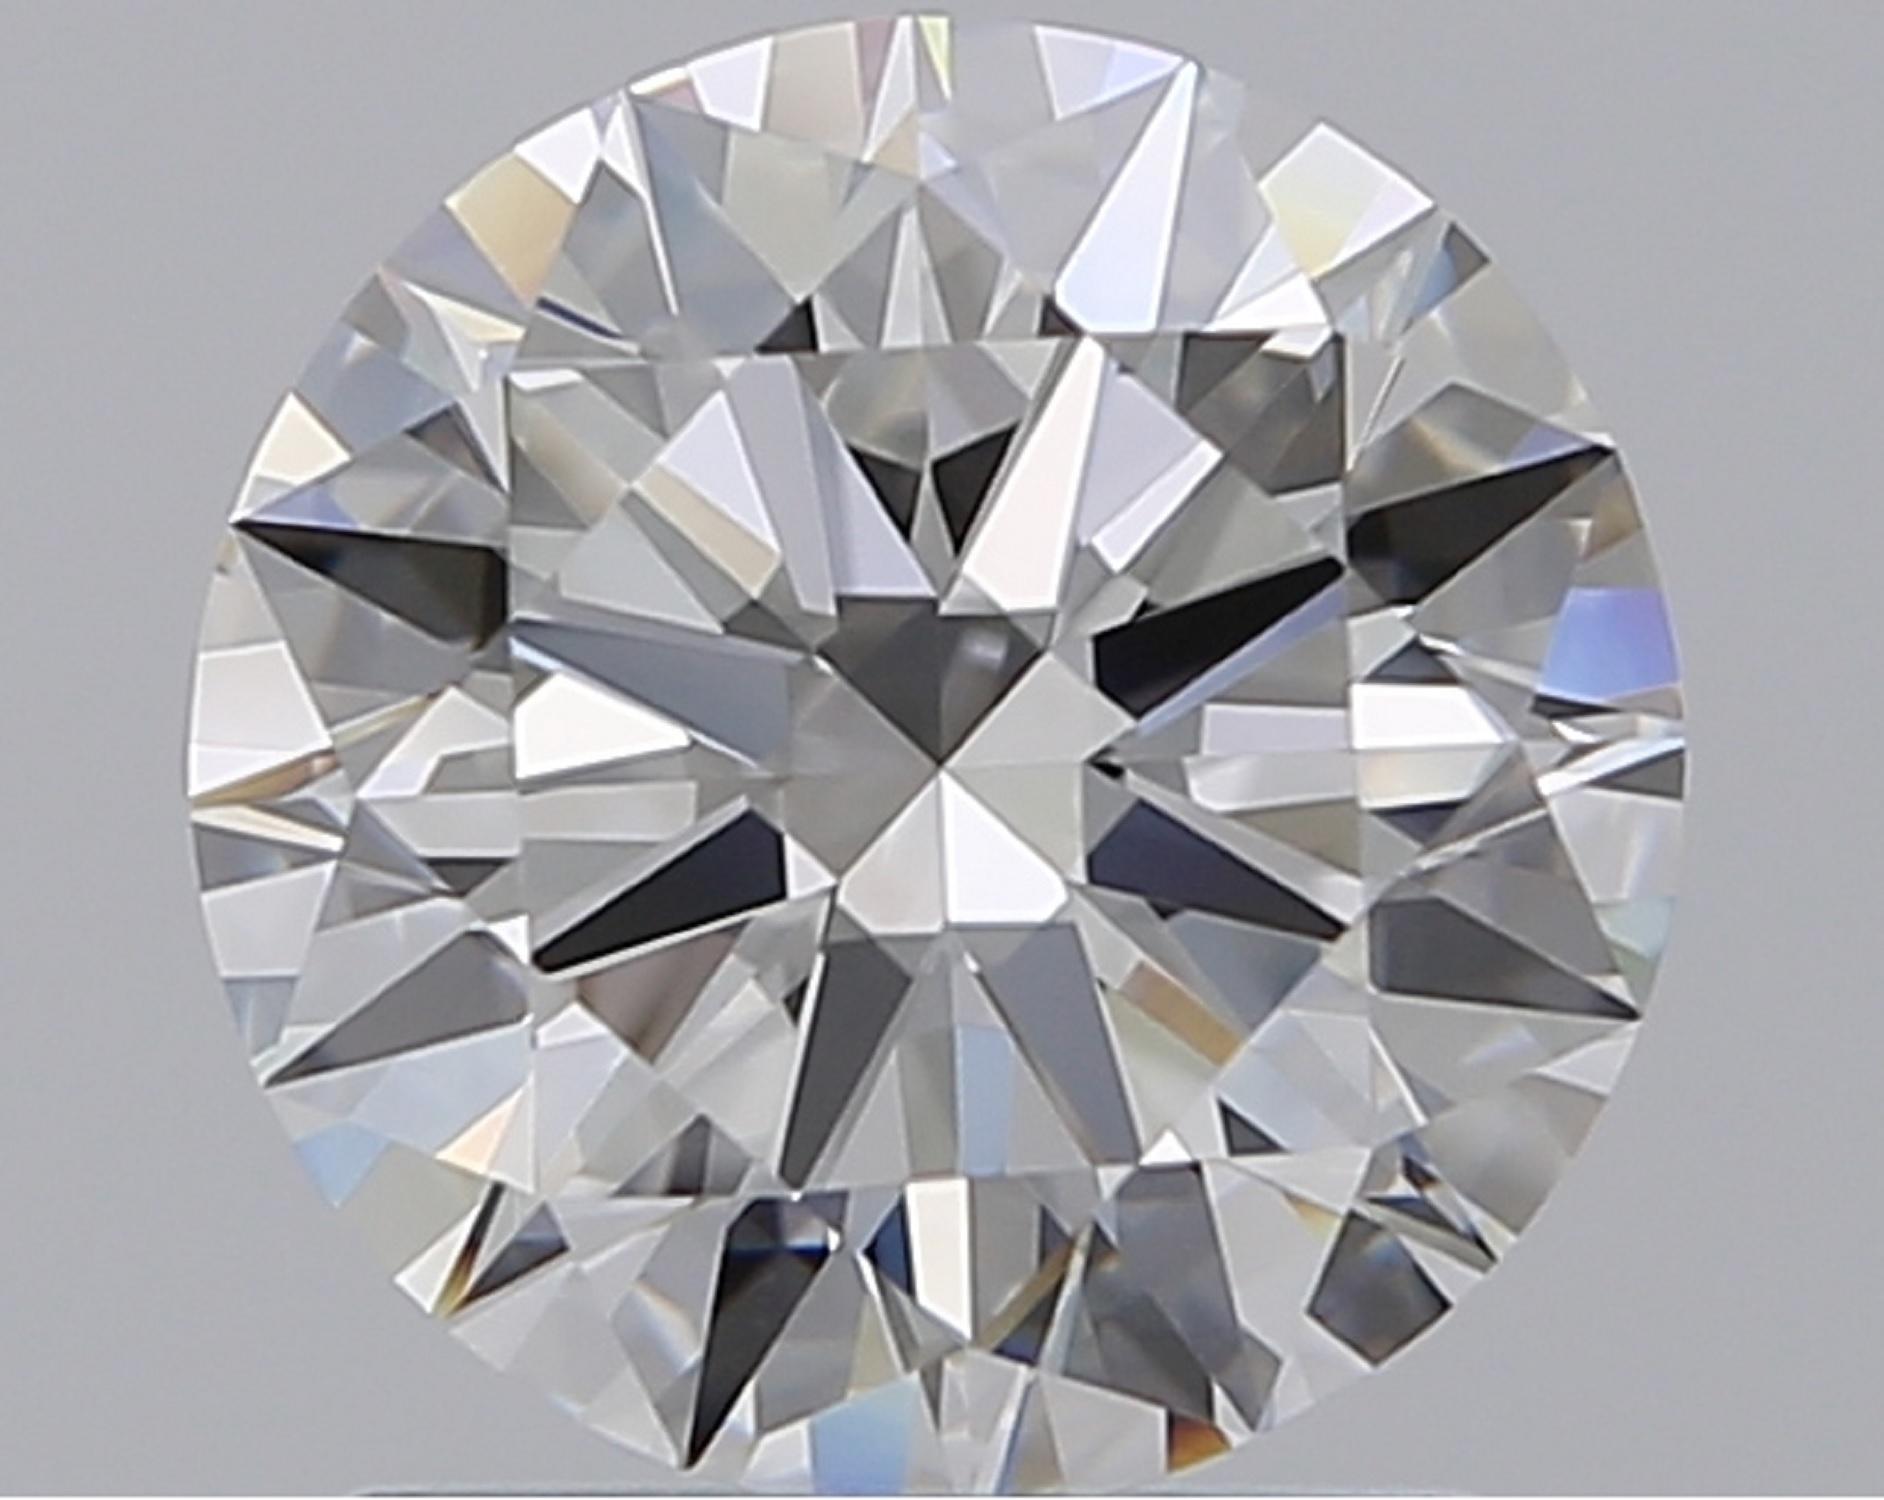 Amazing 1.27 carat round brilliant cut diamond is exceptionally well cut, and bright white with excellent h color! Certified by GIA, the diamond received a grade of Excellent for cut. It also received grades of Excellent for Polish and Symmetry. The